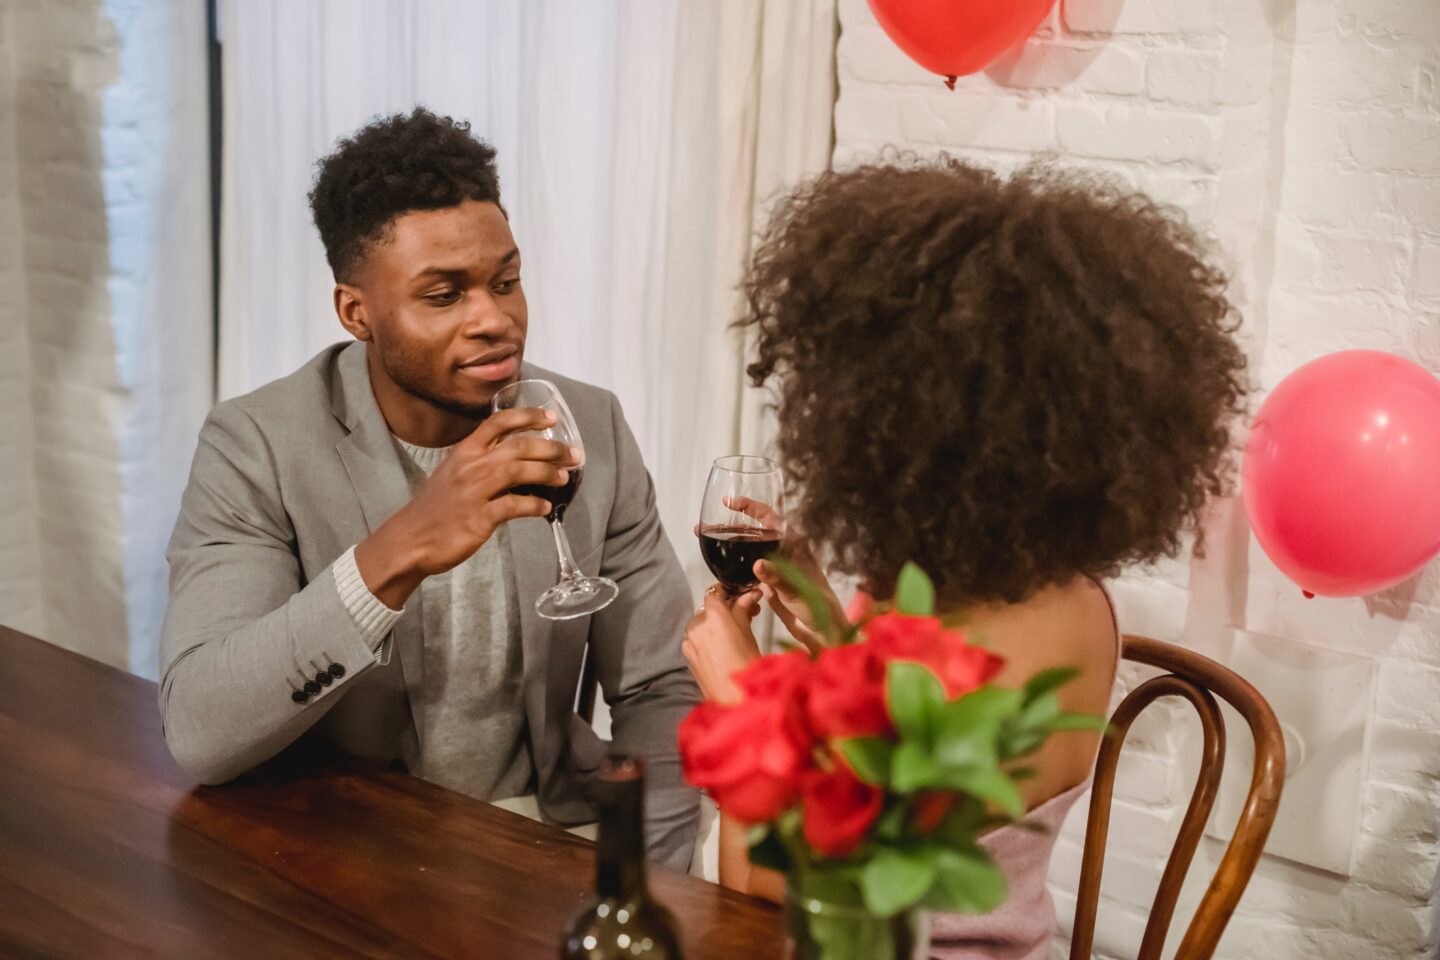 5 Ideas for a Romantic Date Night at Home